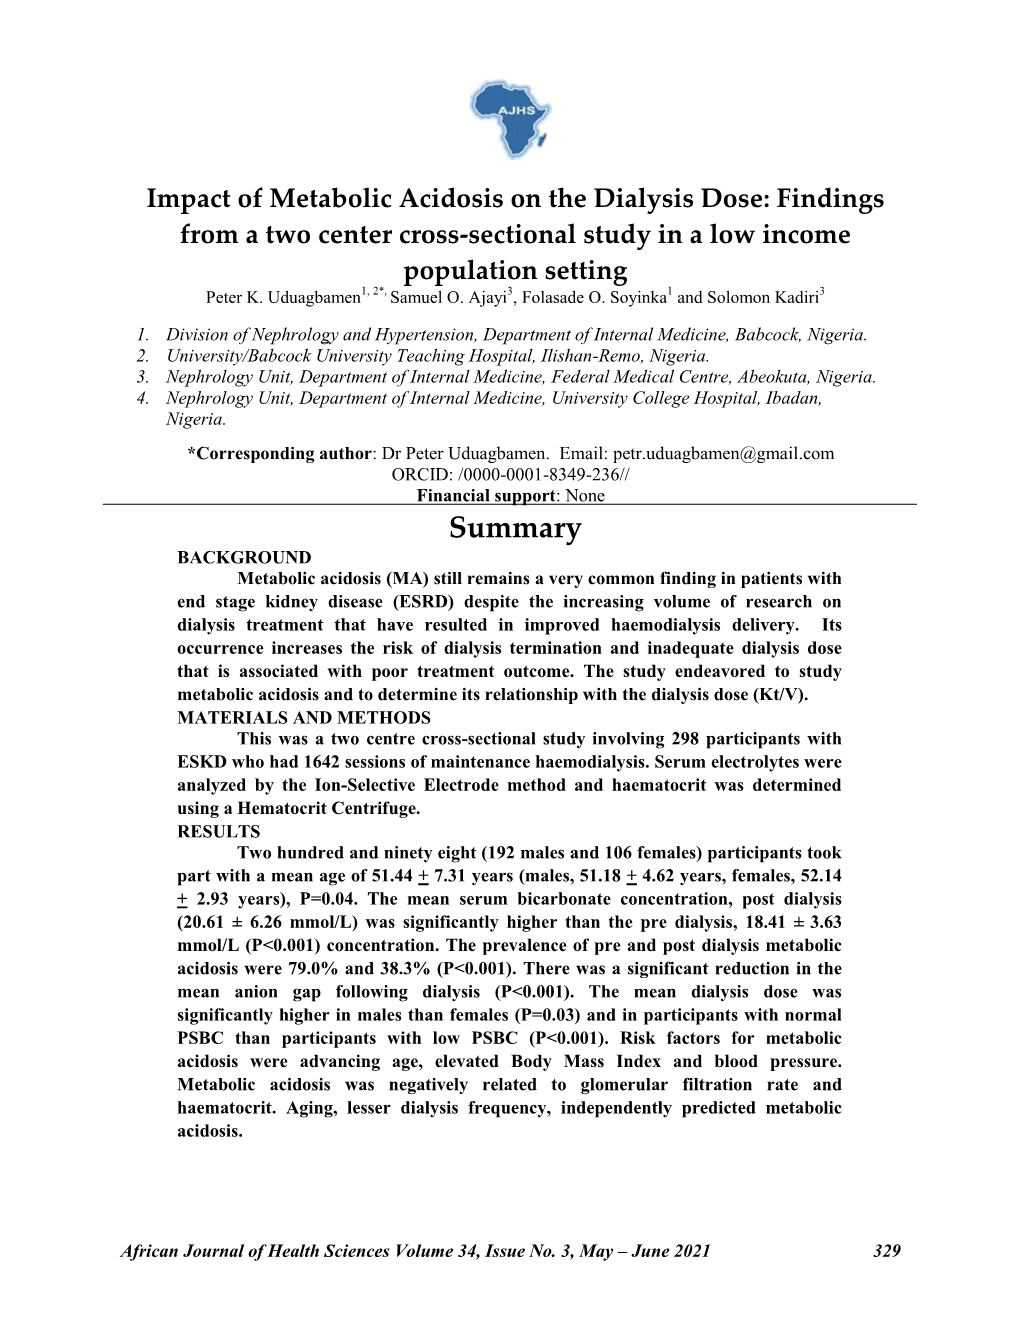 Impact of Metabolic Acidosis on the Dialysis Dose: Findings from a Two Center Cross-Sectional Study in a Low Income Population Setting Peter K